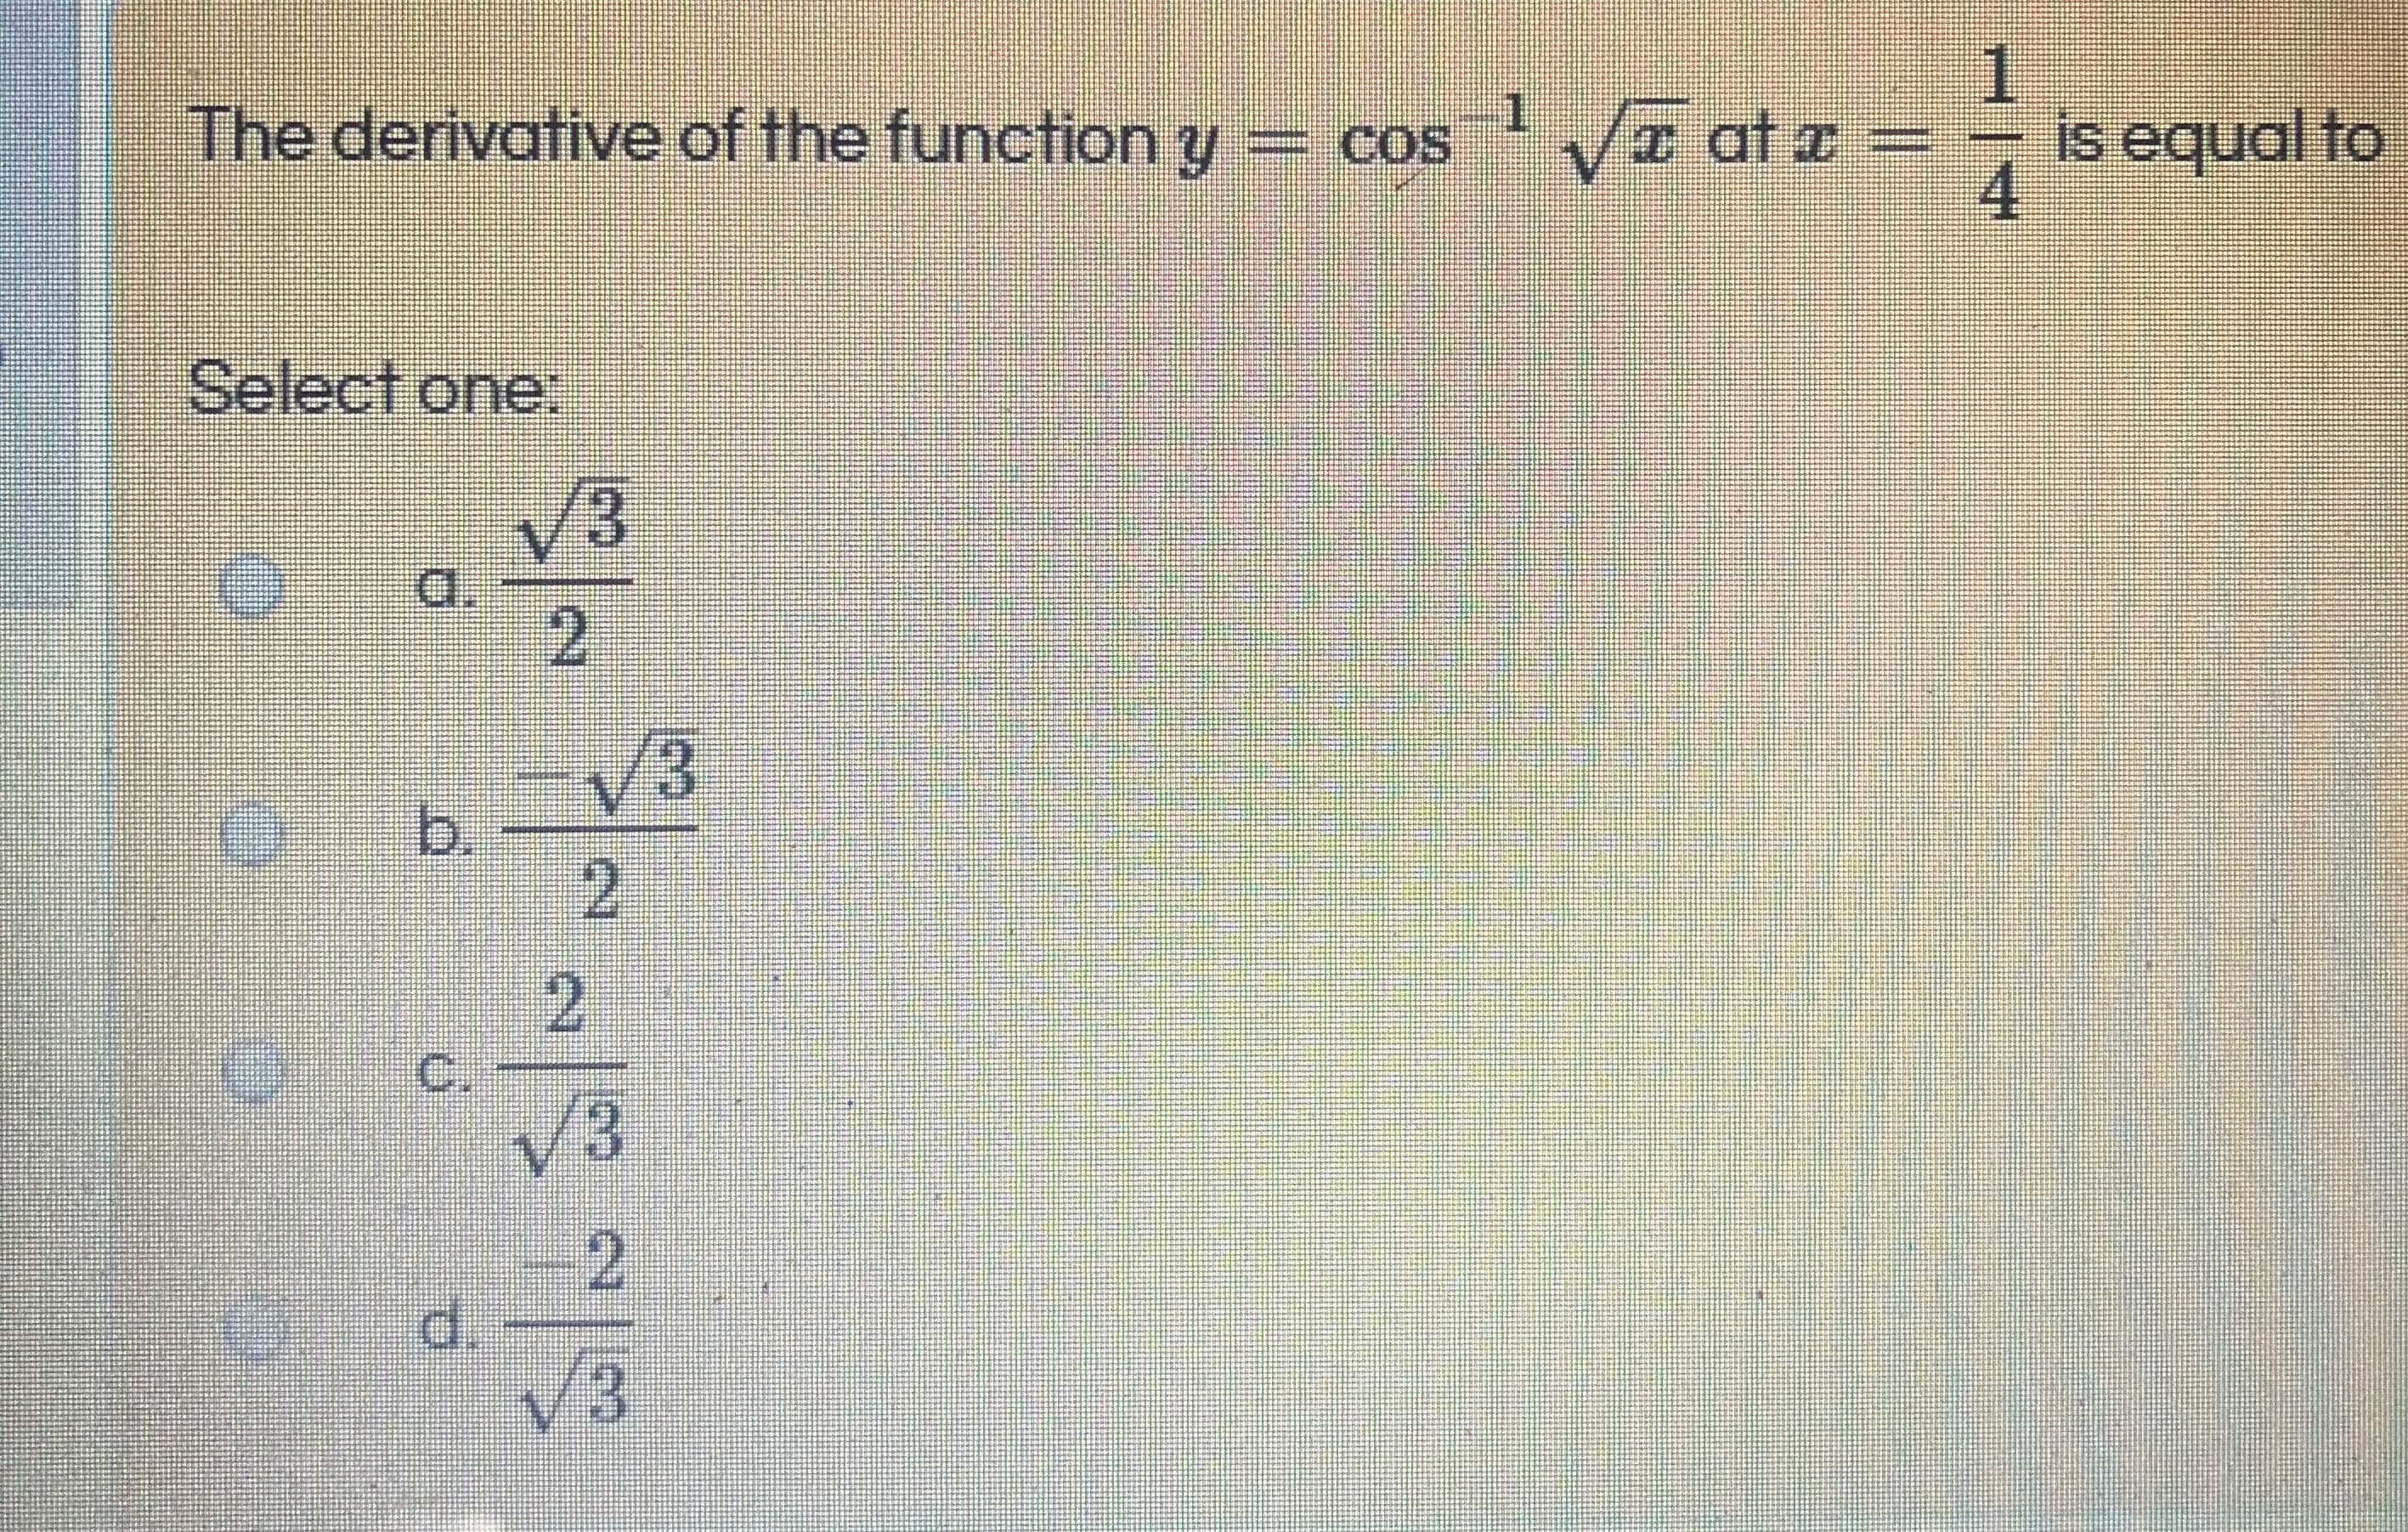 1
The derivative of the function y = cos
V at z
e =
is equal to
4.
